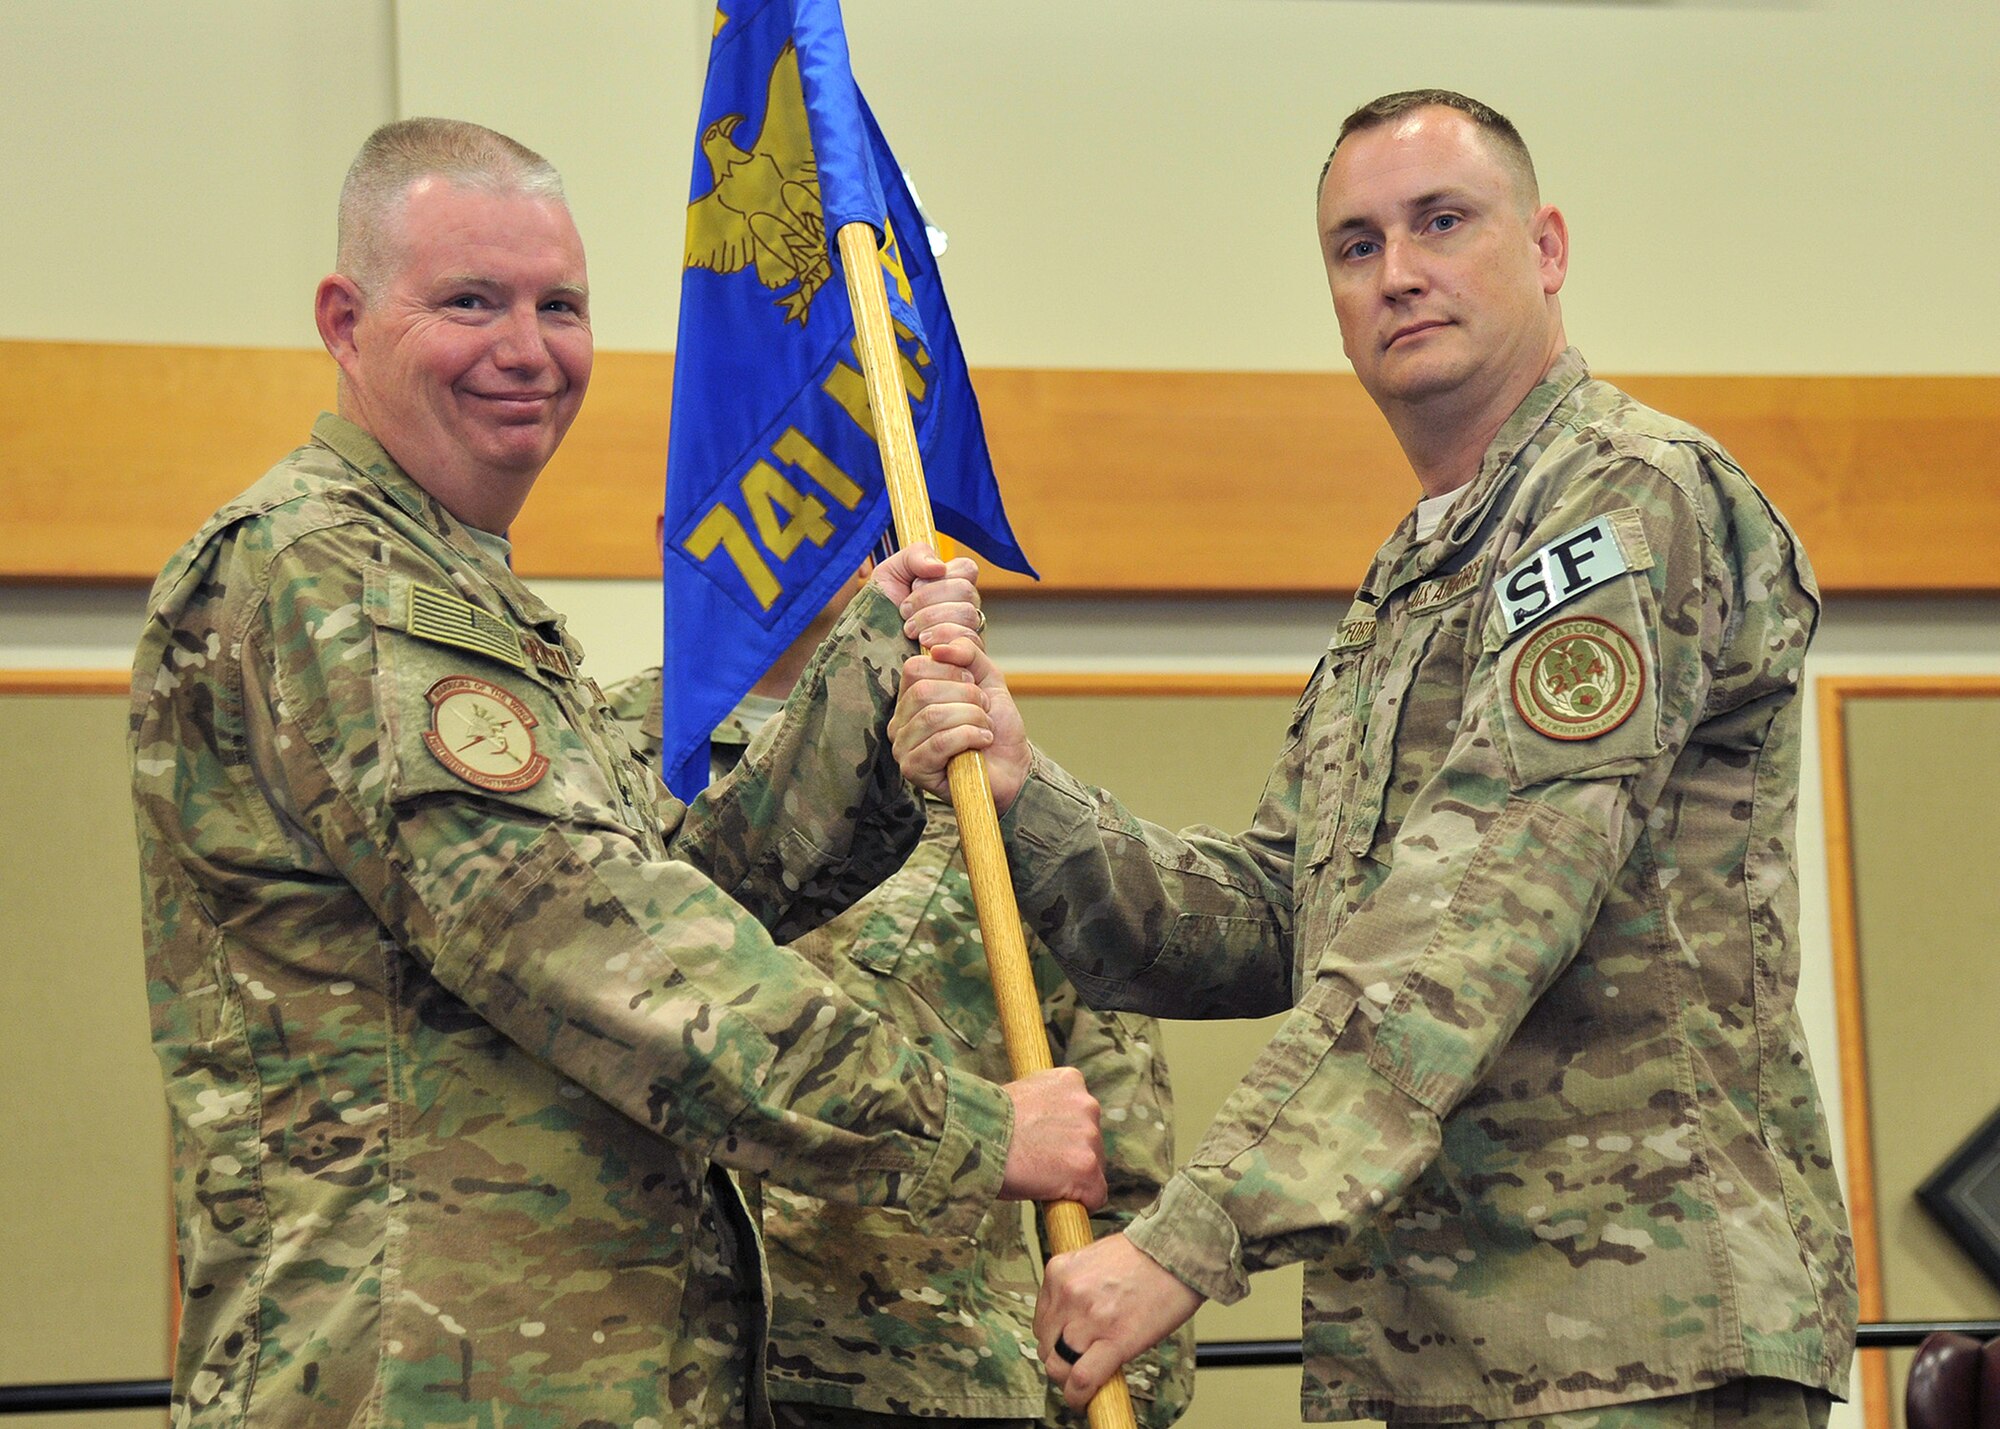 Lt. Col. Raymond Fortner, right, accepts command of the 741st Missile Security Forces Squadron from Col. Robert Frederiksen, 341st Security Forces Group commander July 12, 2017 at Malmstrom Air Force Base, Mont. (U.S. Air Force photo/John Turner)